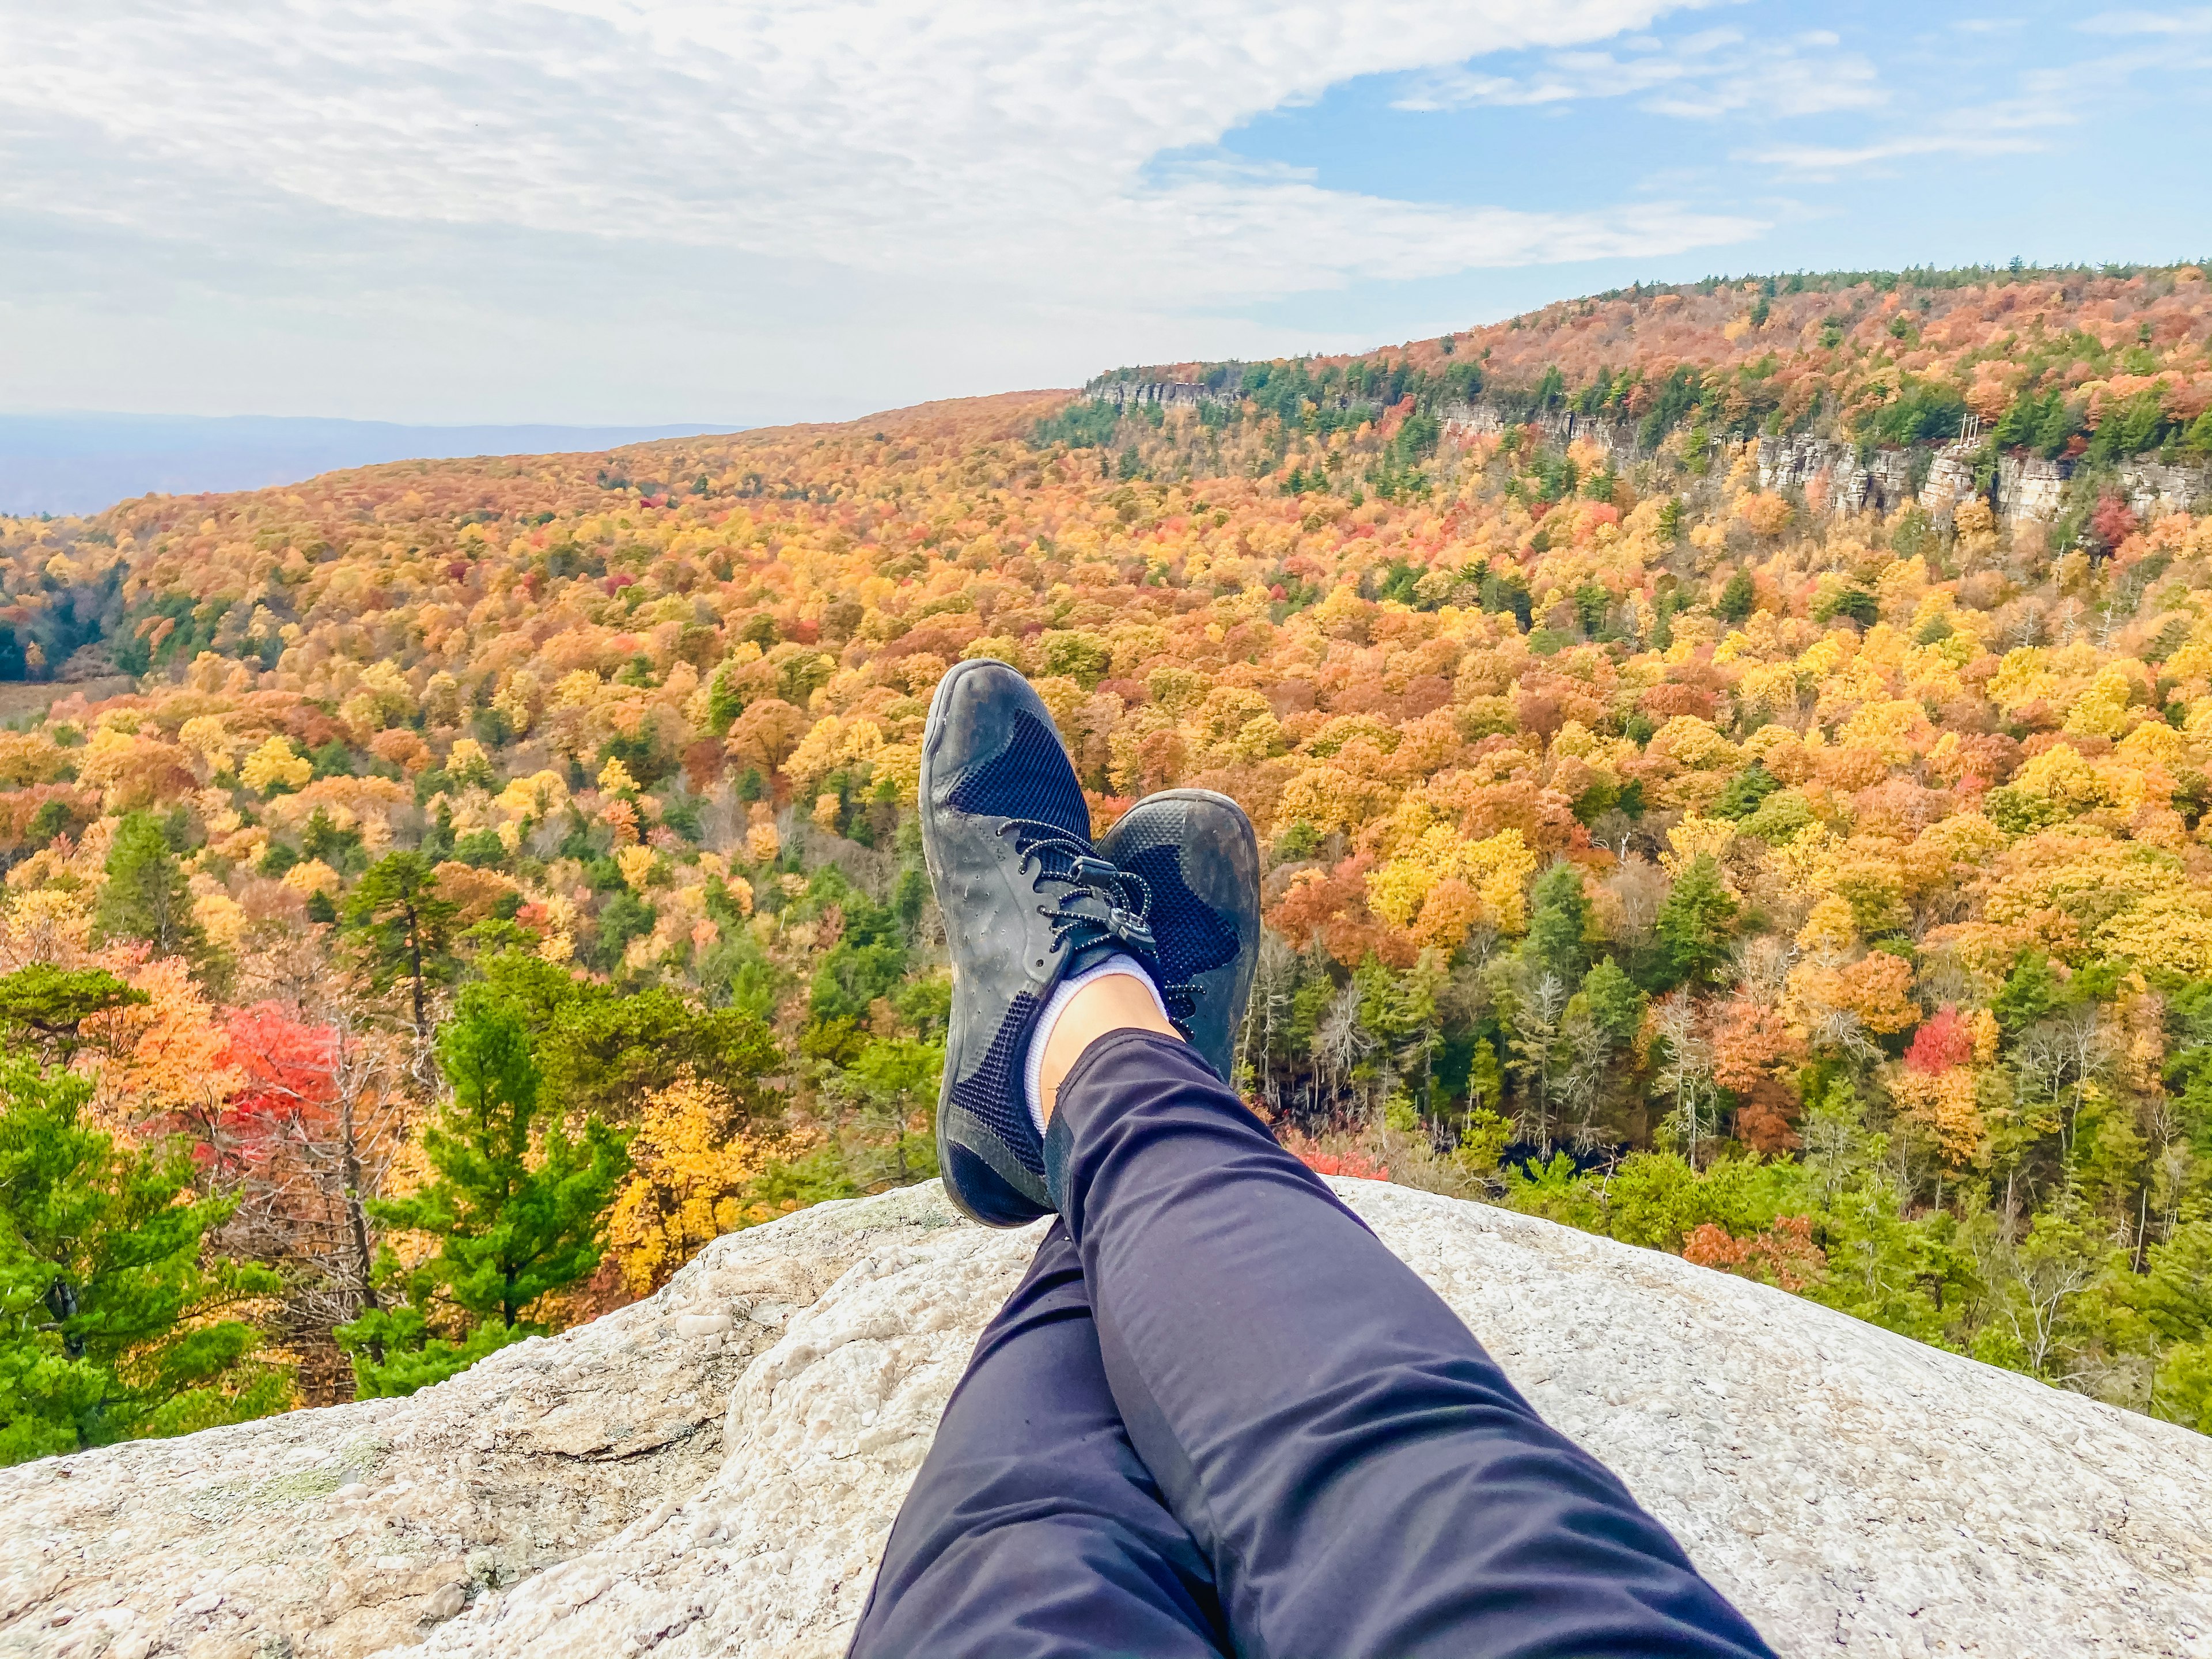 Autumn in the Hudson Valley, New York is one of the most dramatic and vibrant fall landscapes anywhere in the country. It is a sought after travel destination for those looking to see beautiful fall colors and to experience the great outdoors through hiking.